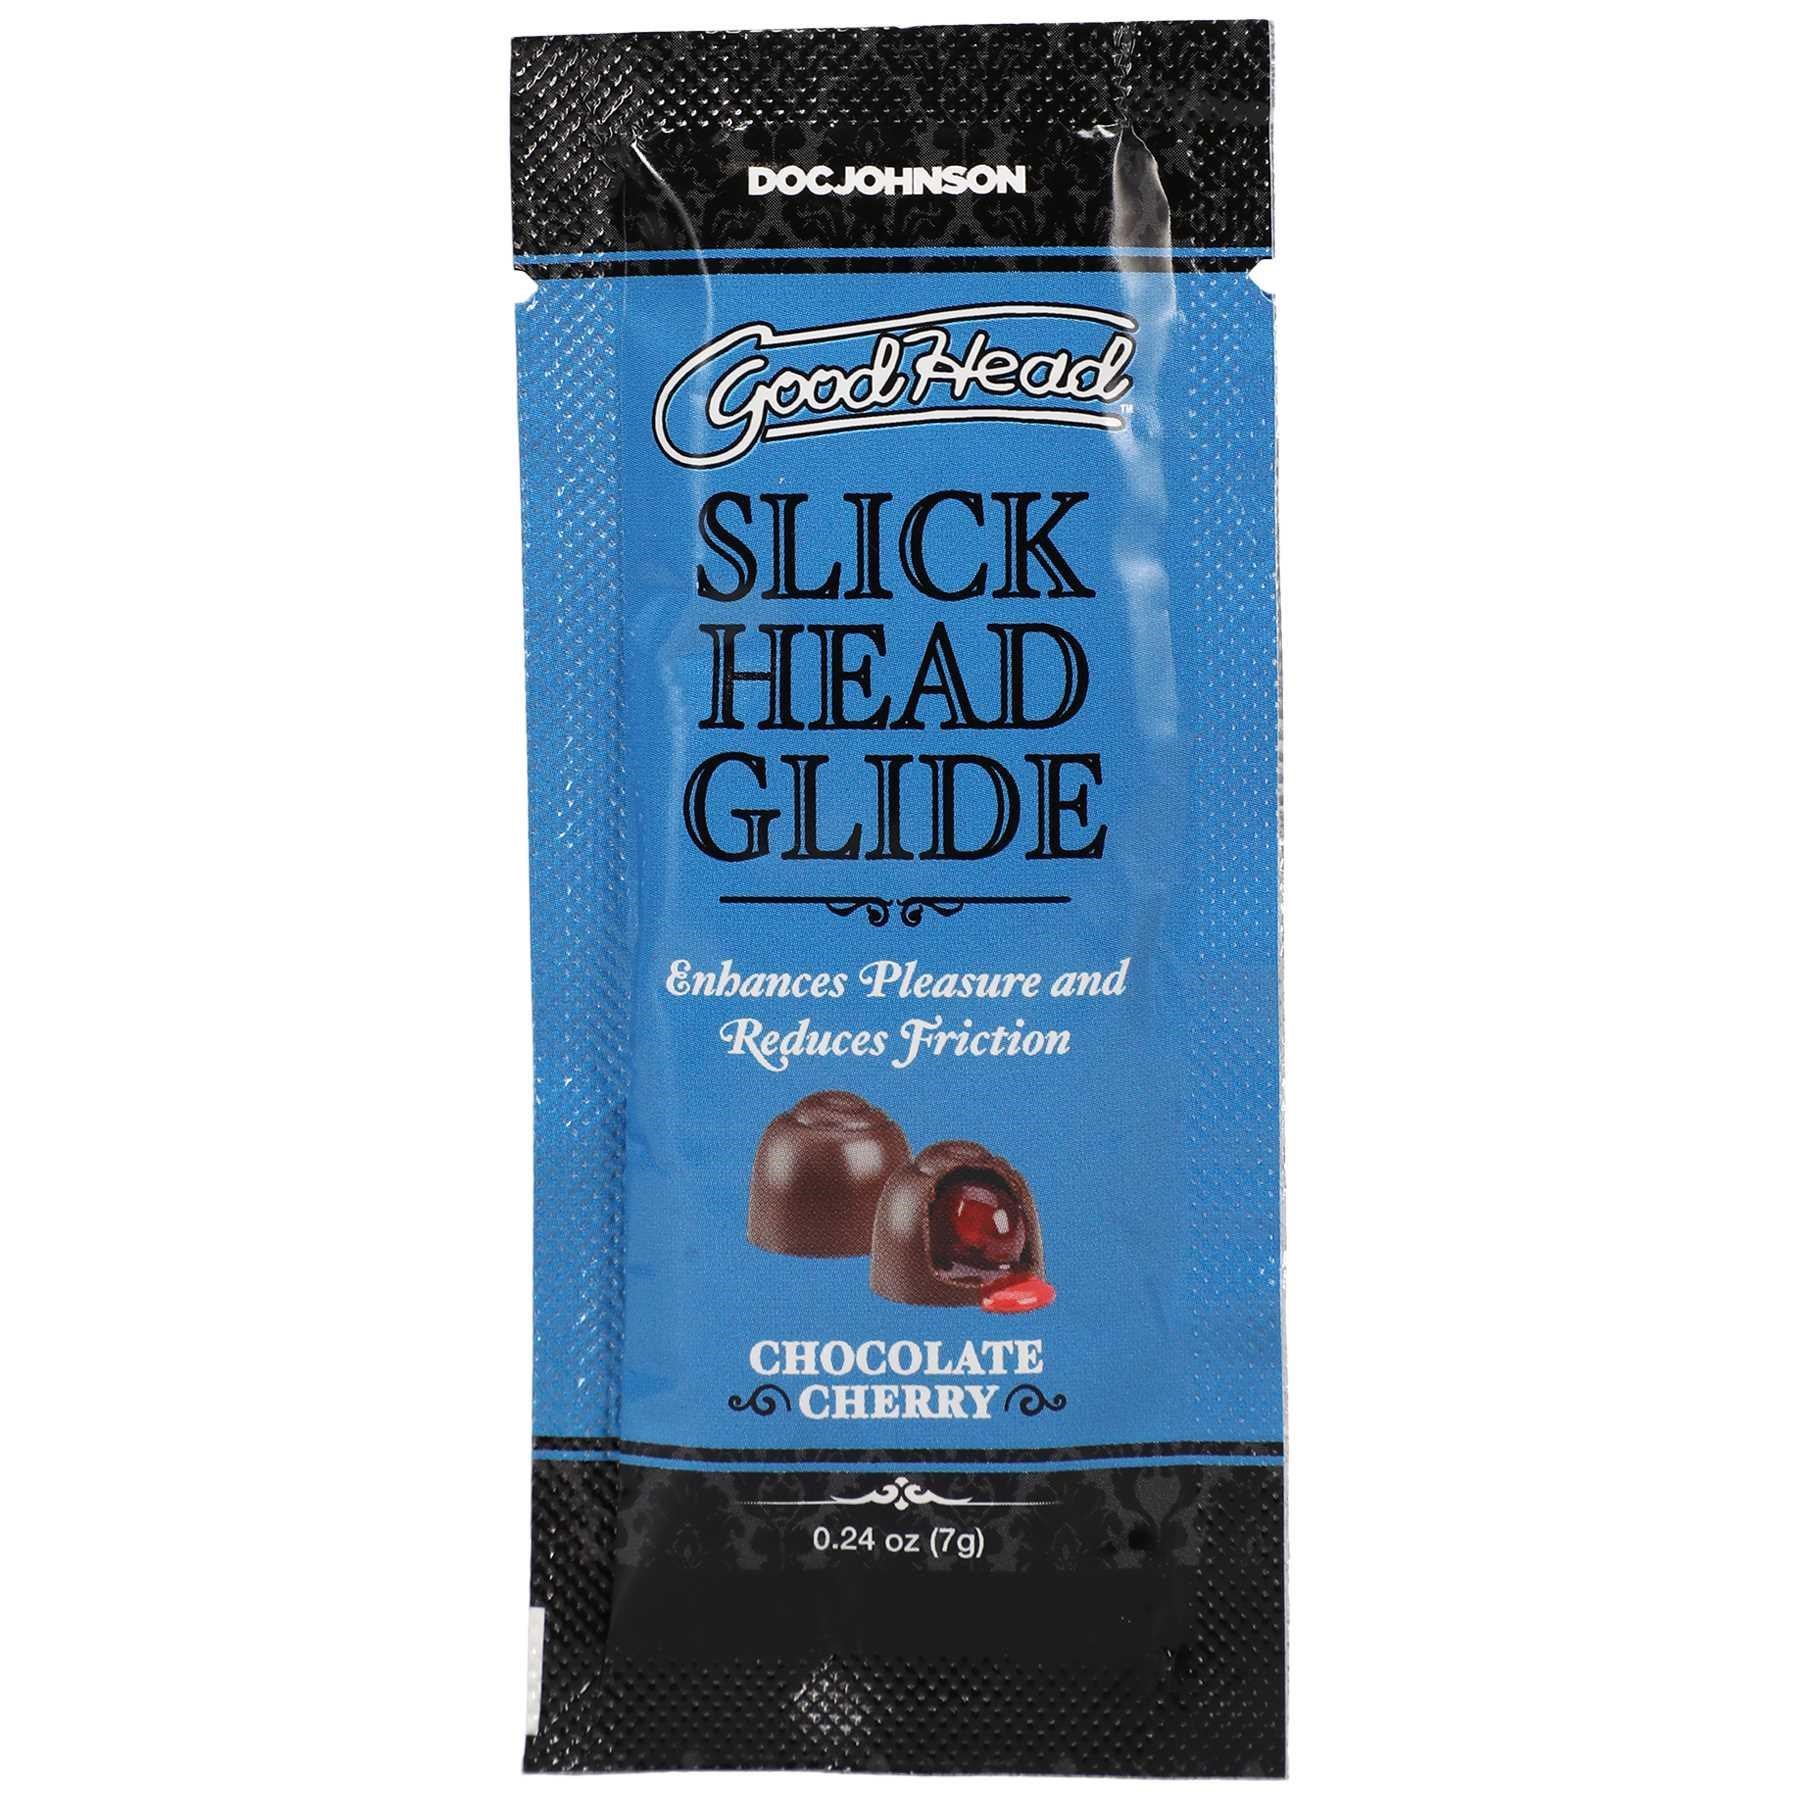 GoodHead - Slick Head Glide -chocolate cherry front of package-  0.24 oz.